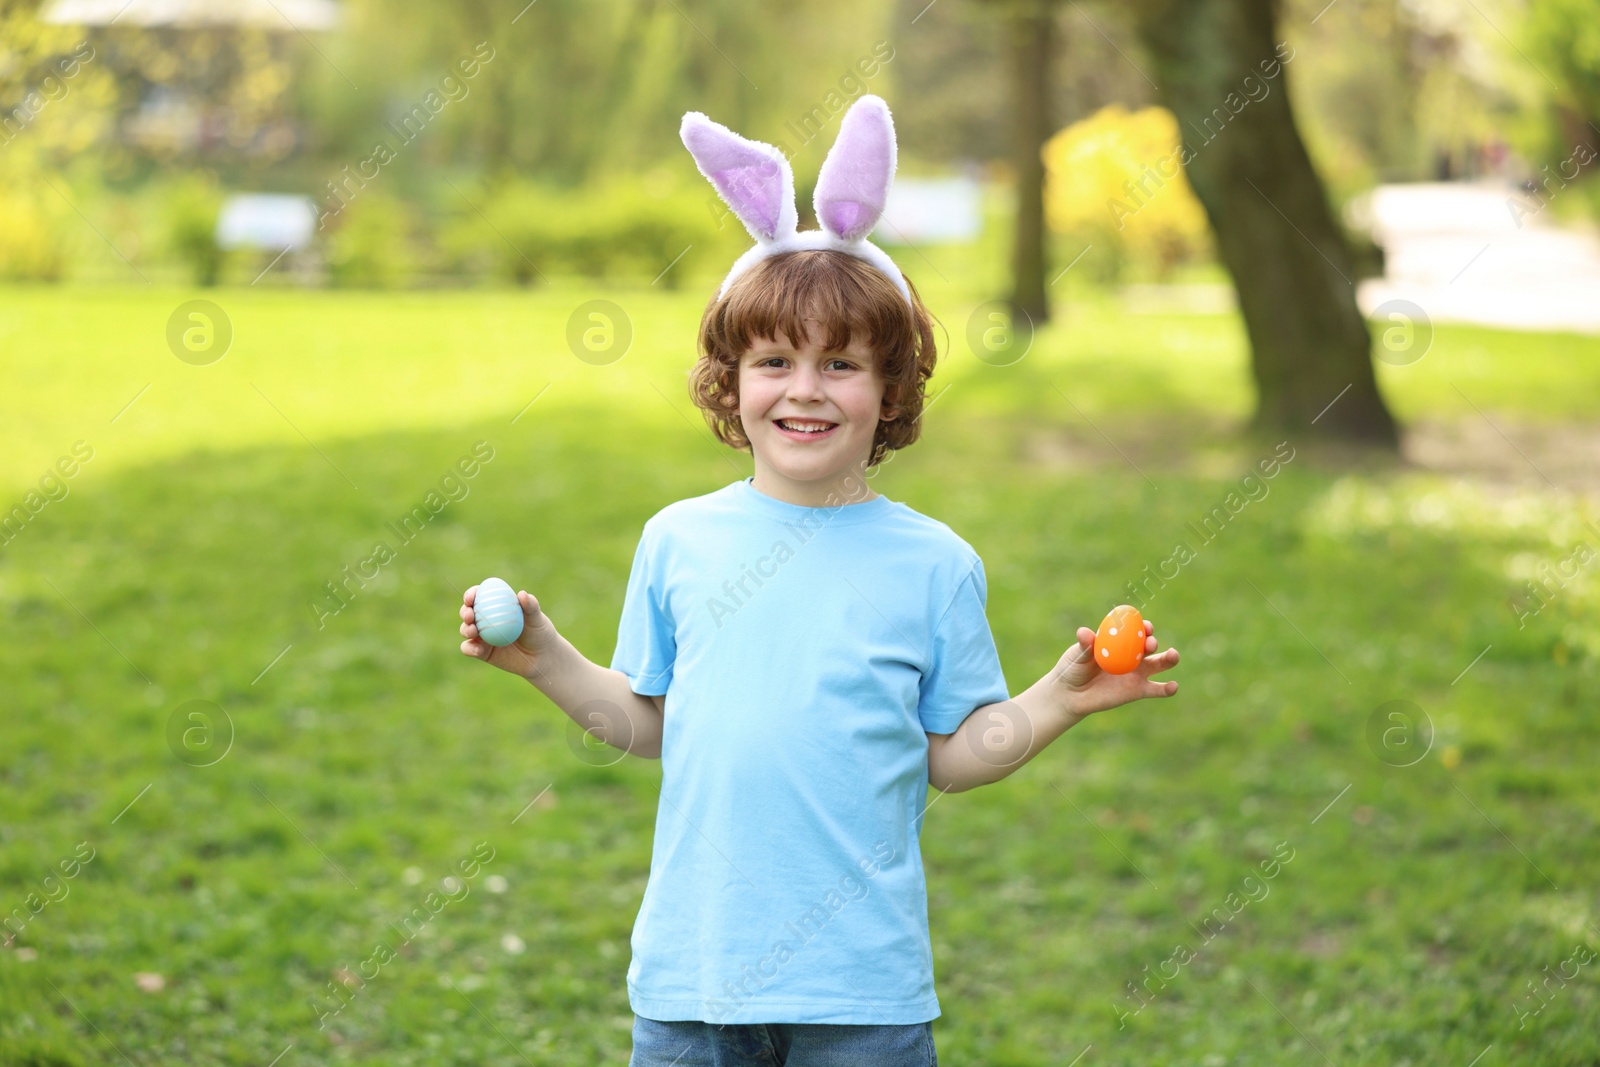 Photo of Easter celebration. Cute little boy in bunny ears holding painted eggs outdoors